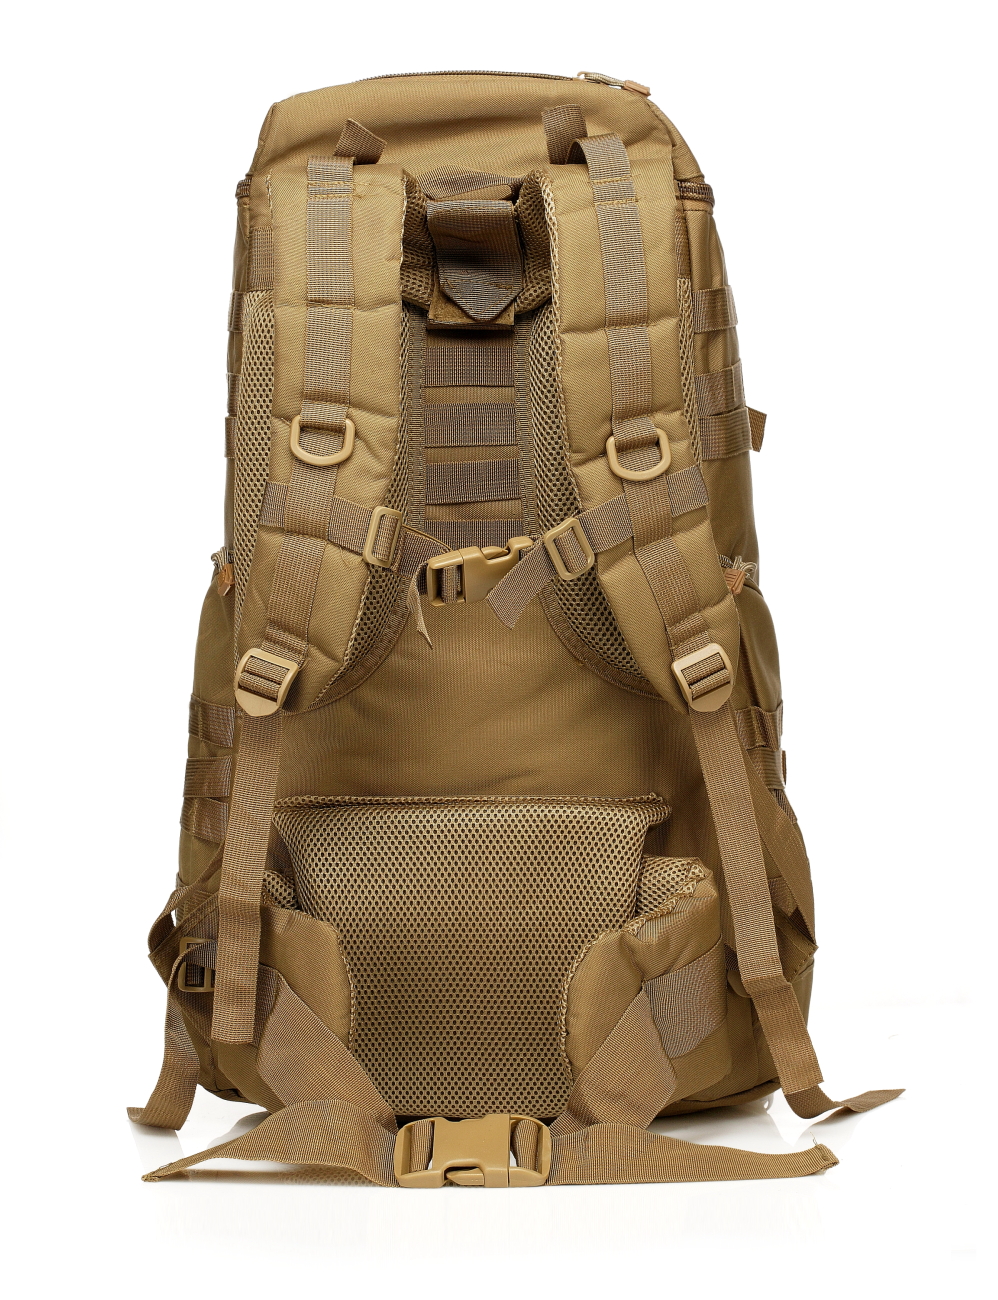 FAITH-PRO-55L-Military-Tactical-Assault-Backpack-Camping-Riding-Large-Multifunction-Sport-Rucksack-1202301-4